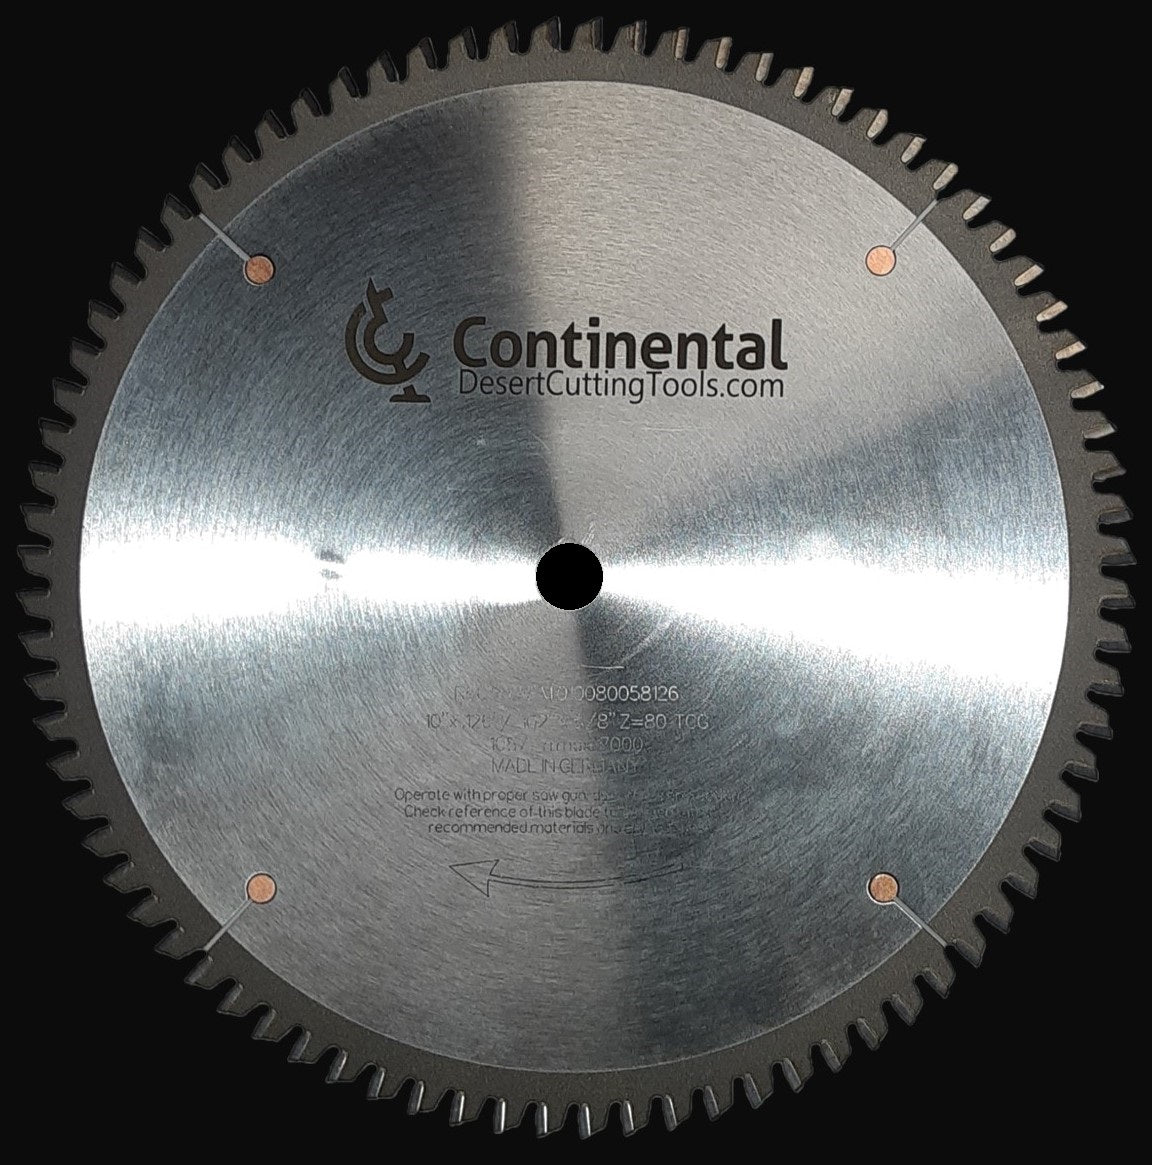 C-1080N Continental Saw Blade 10"x80 tooth 5/8" bore Triple Chip 5' Neg Hook